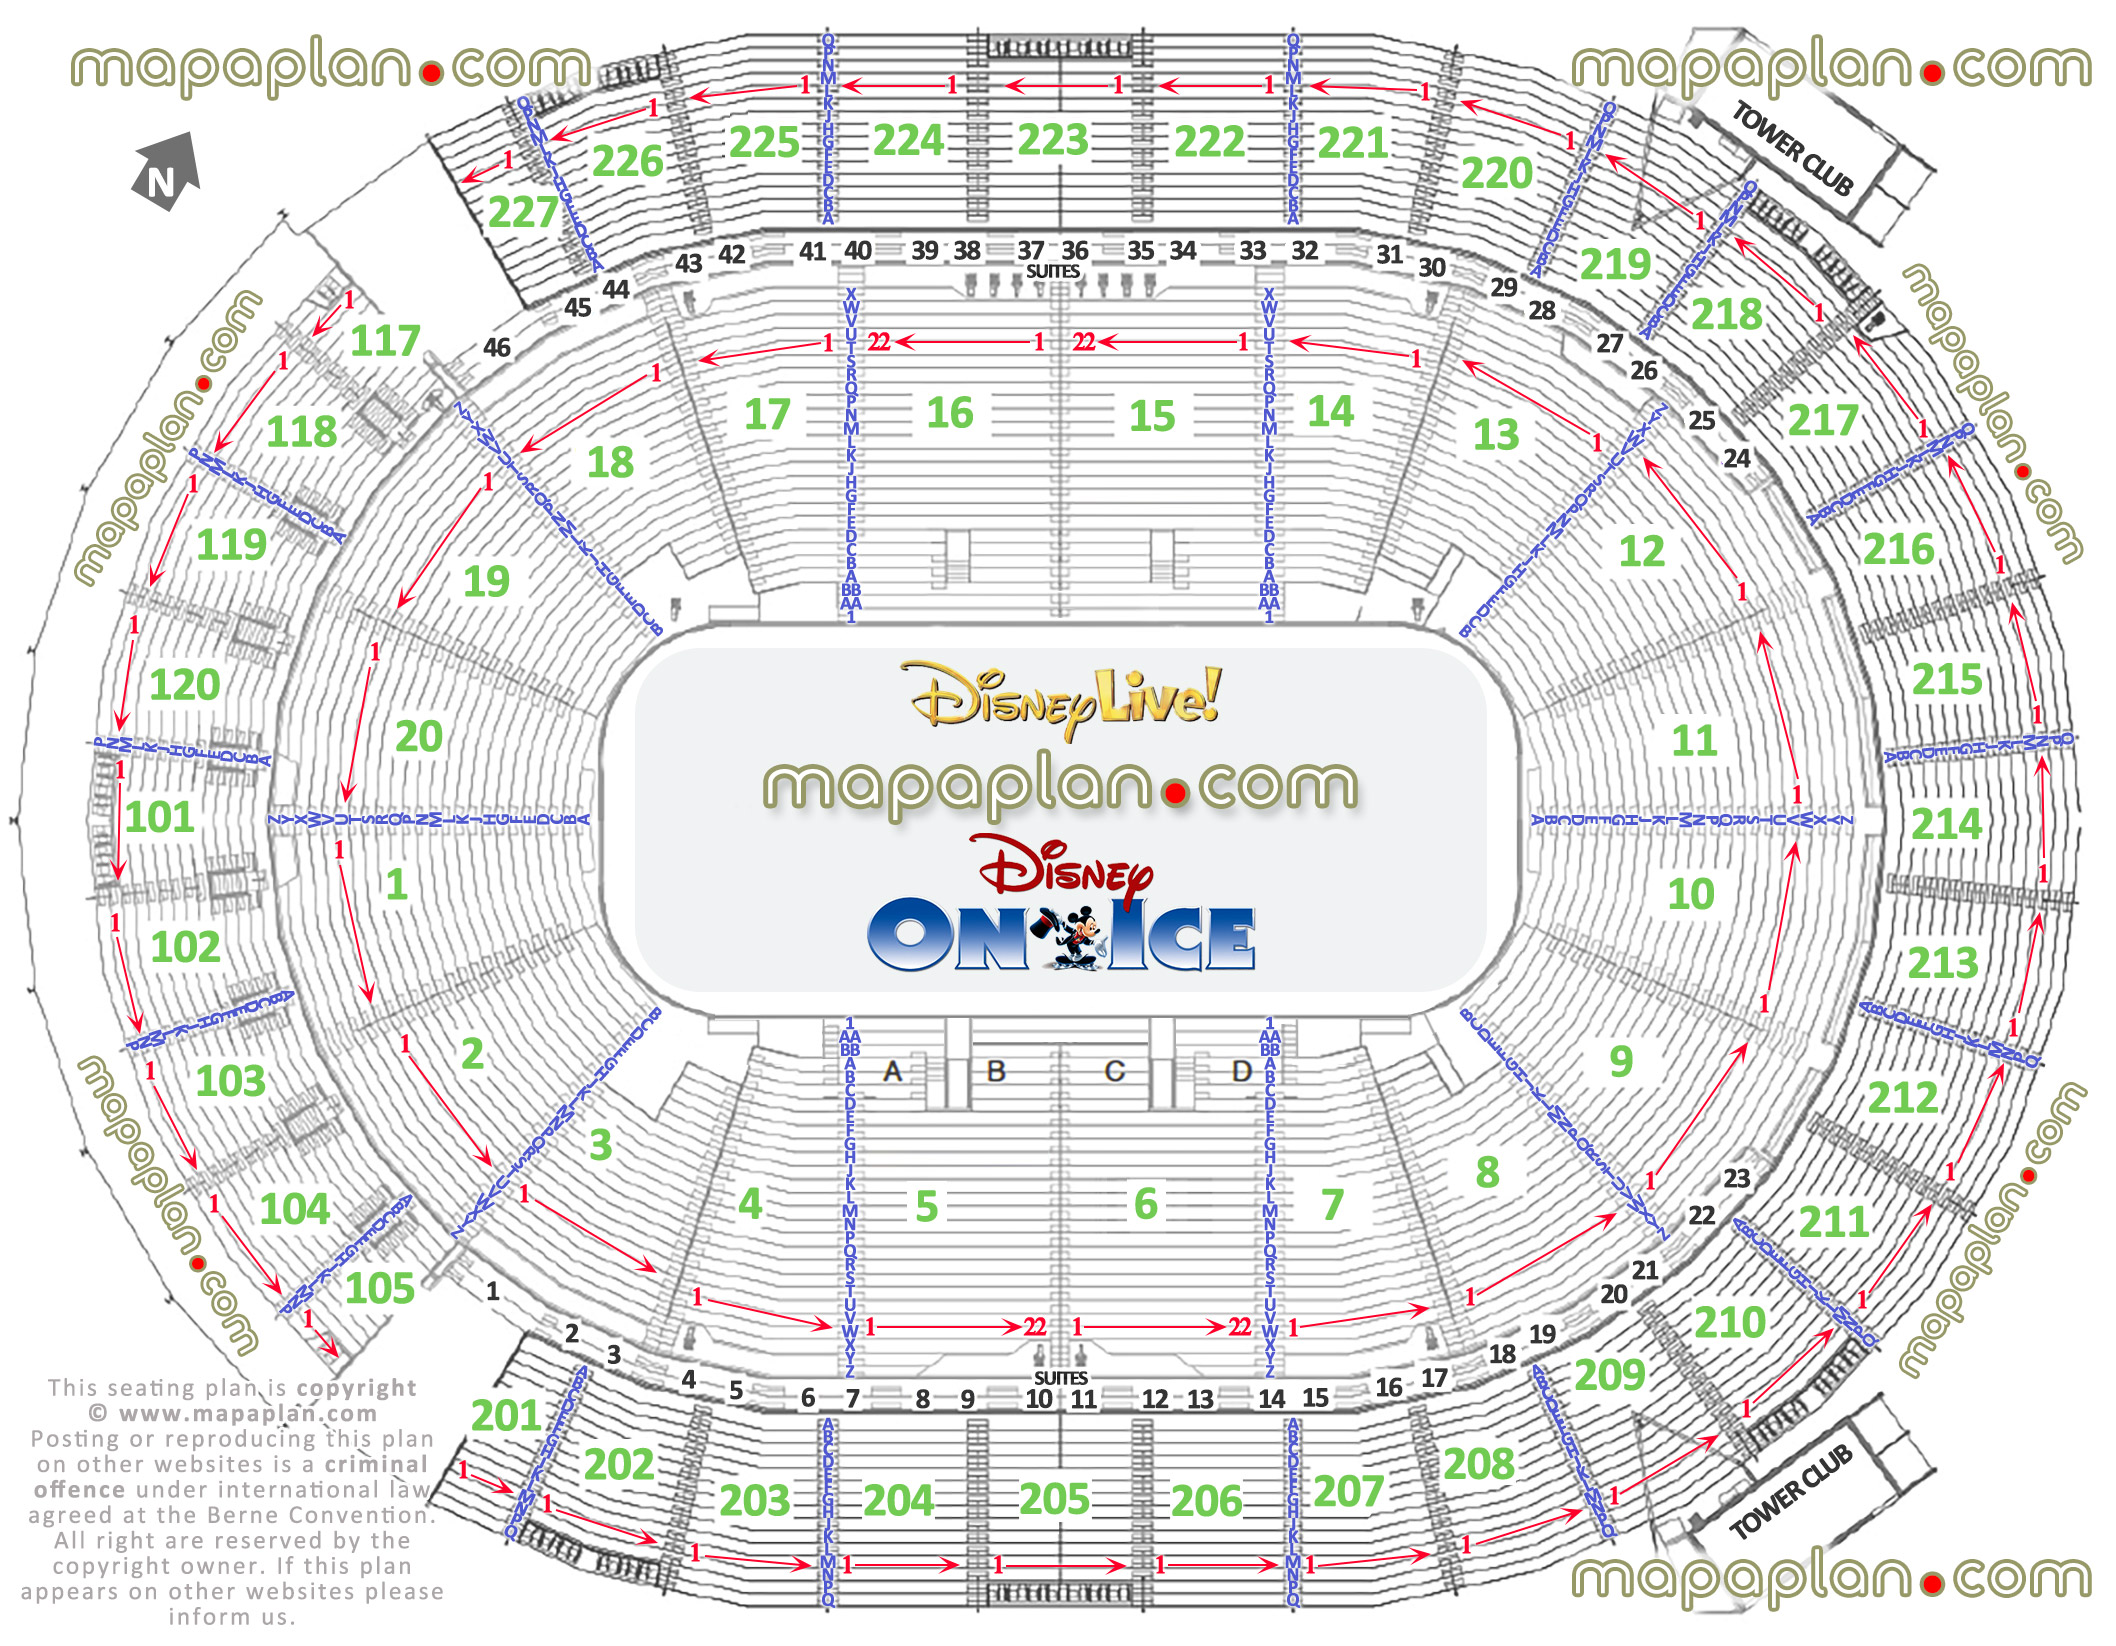 disney ice live las vegas nv usa best seat finder 3d interactive tool precise detailed aisle seat numbering location data plan ice rink event floor level lower bowl concourse upper balcony seating suites loge boxes Las Vegas T-Mobile Arena Las Vegas T-Mobile Arena seating chart